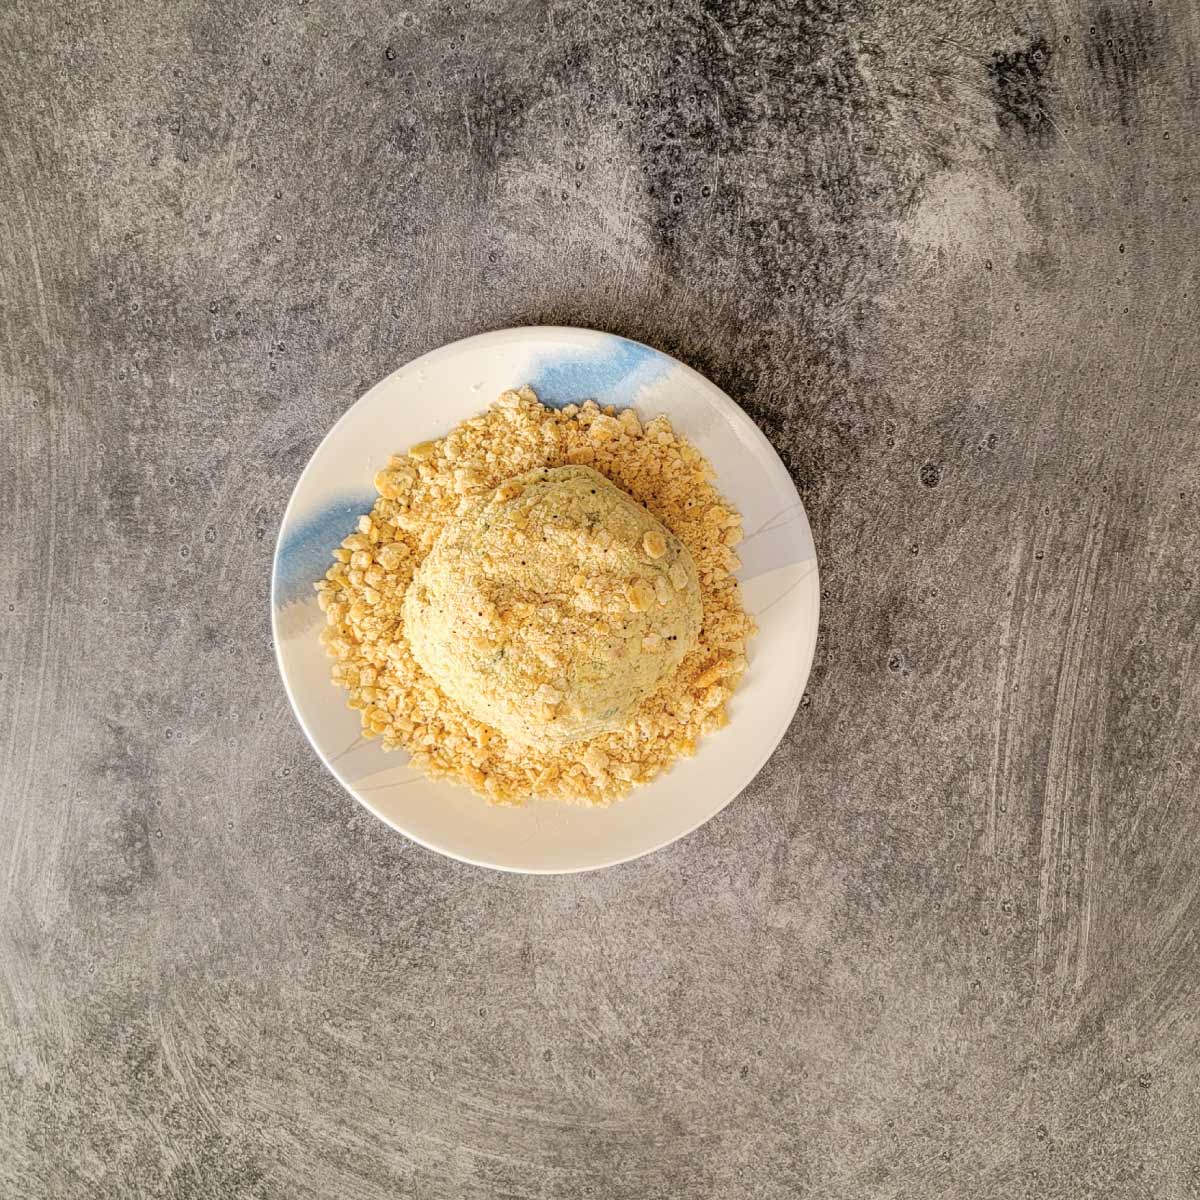 Cheeseball being coated in crushed crackers on a small plate.